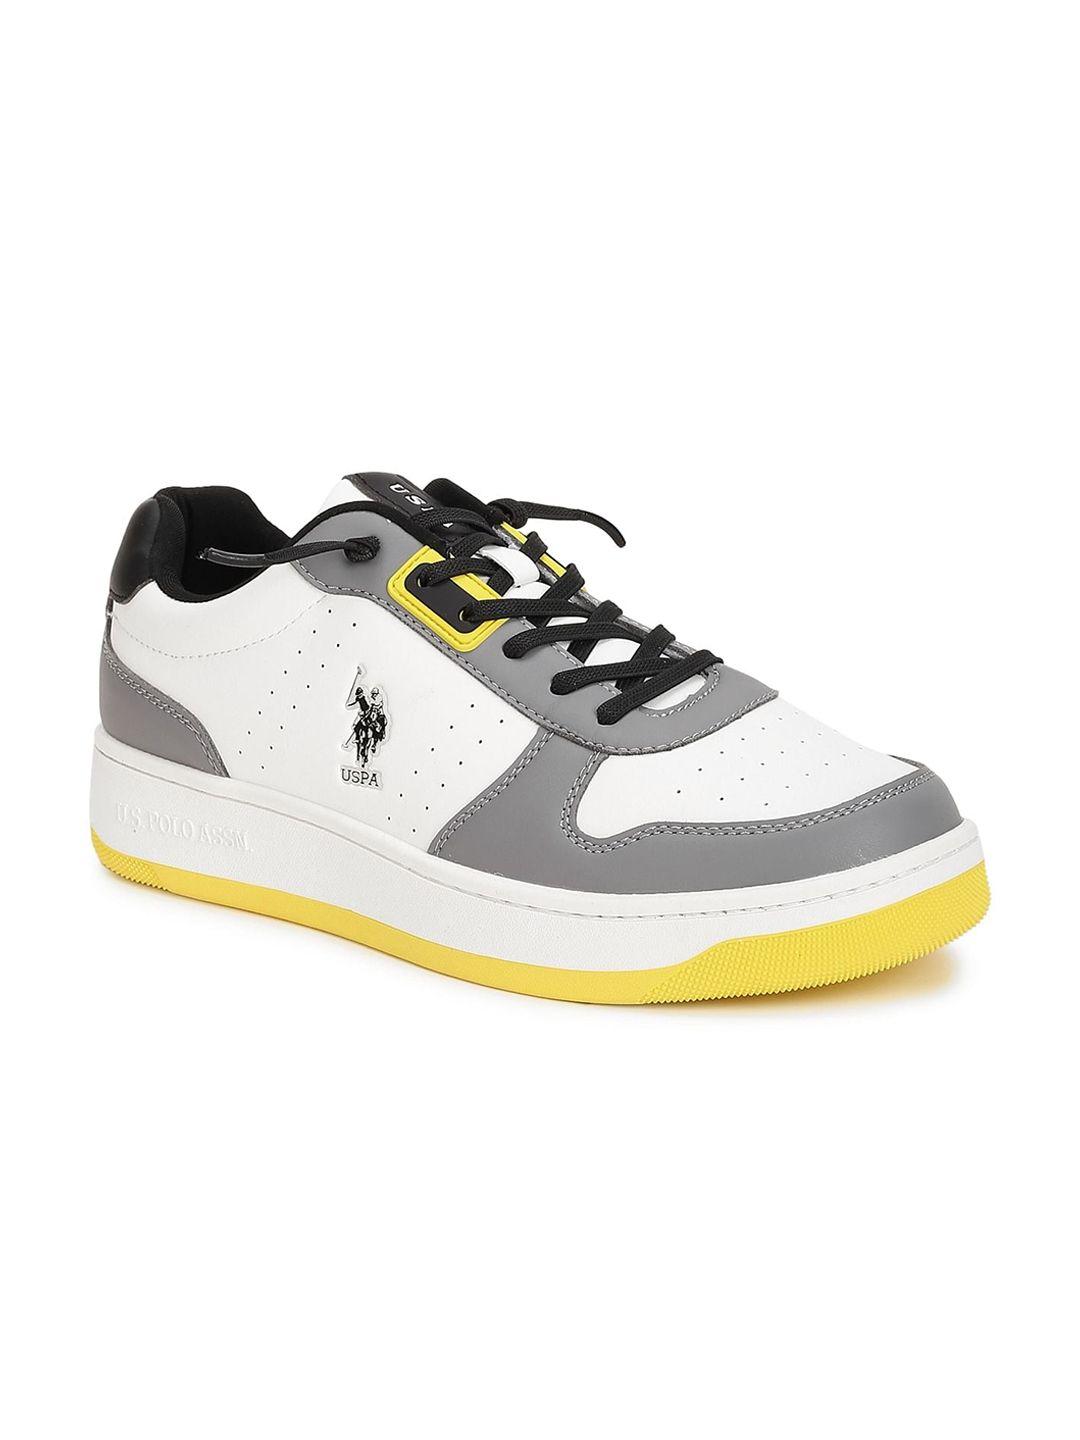 U.S. Polo Assn. Men Perforations Comfort Insole Sneakers